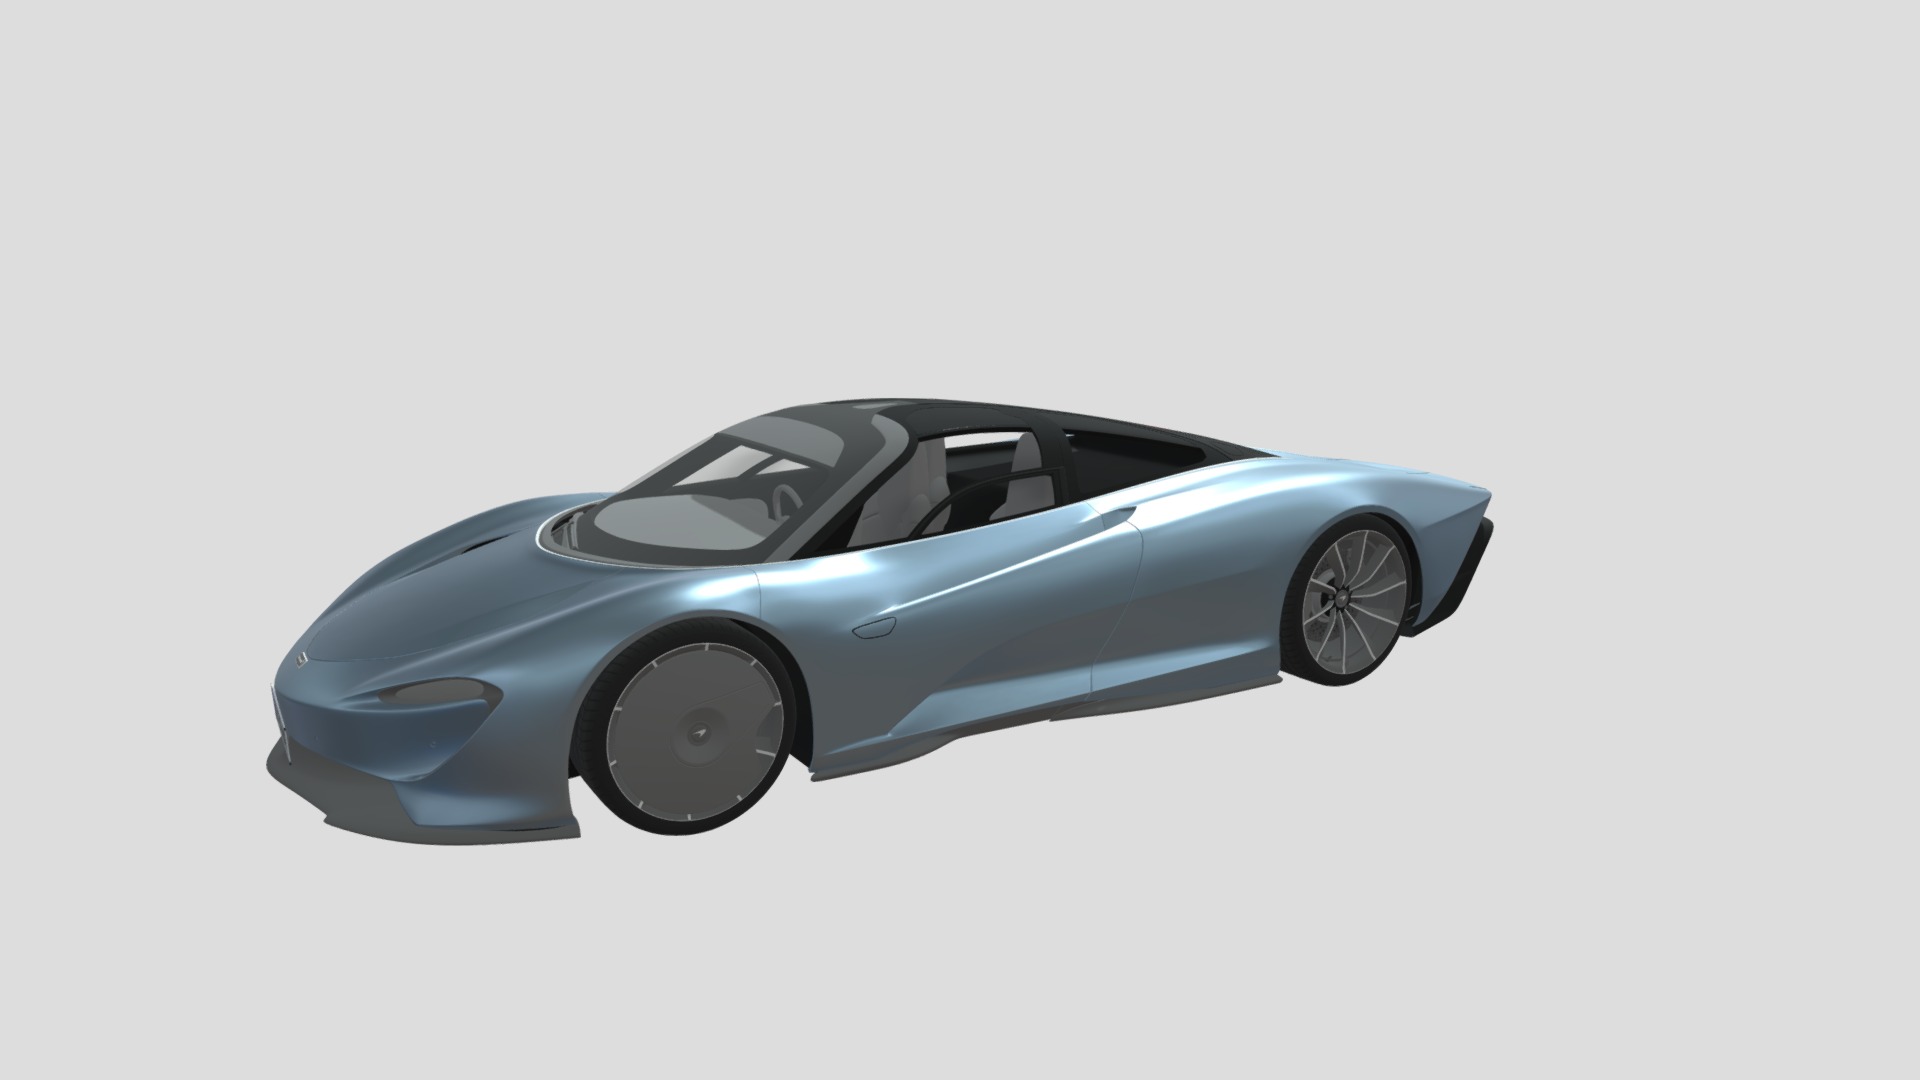 3D model McLaren Speedtail 2020 - This is a 3D model of the McLaren Speedtail 2020. The 3D model is about a blue and black car.